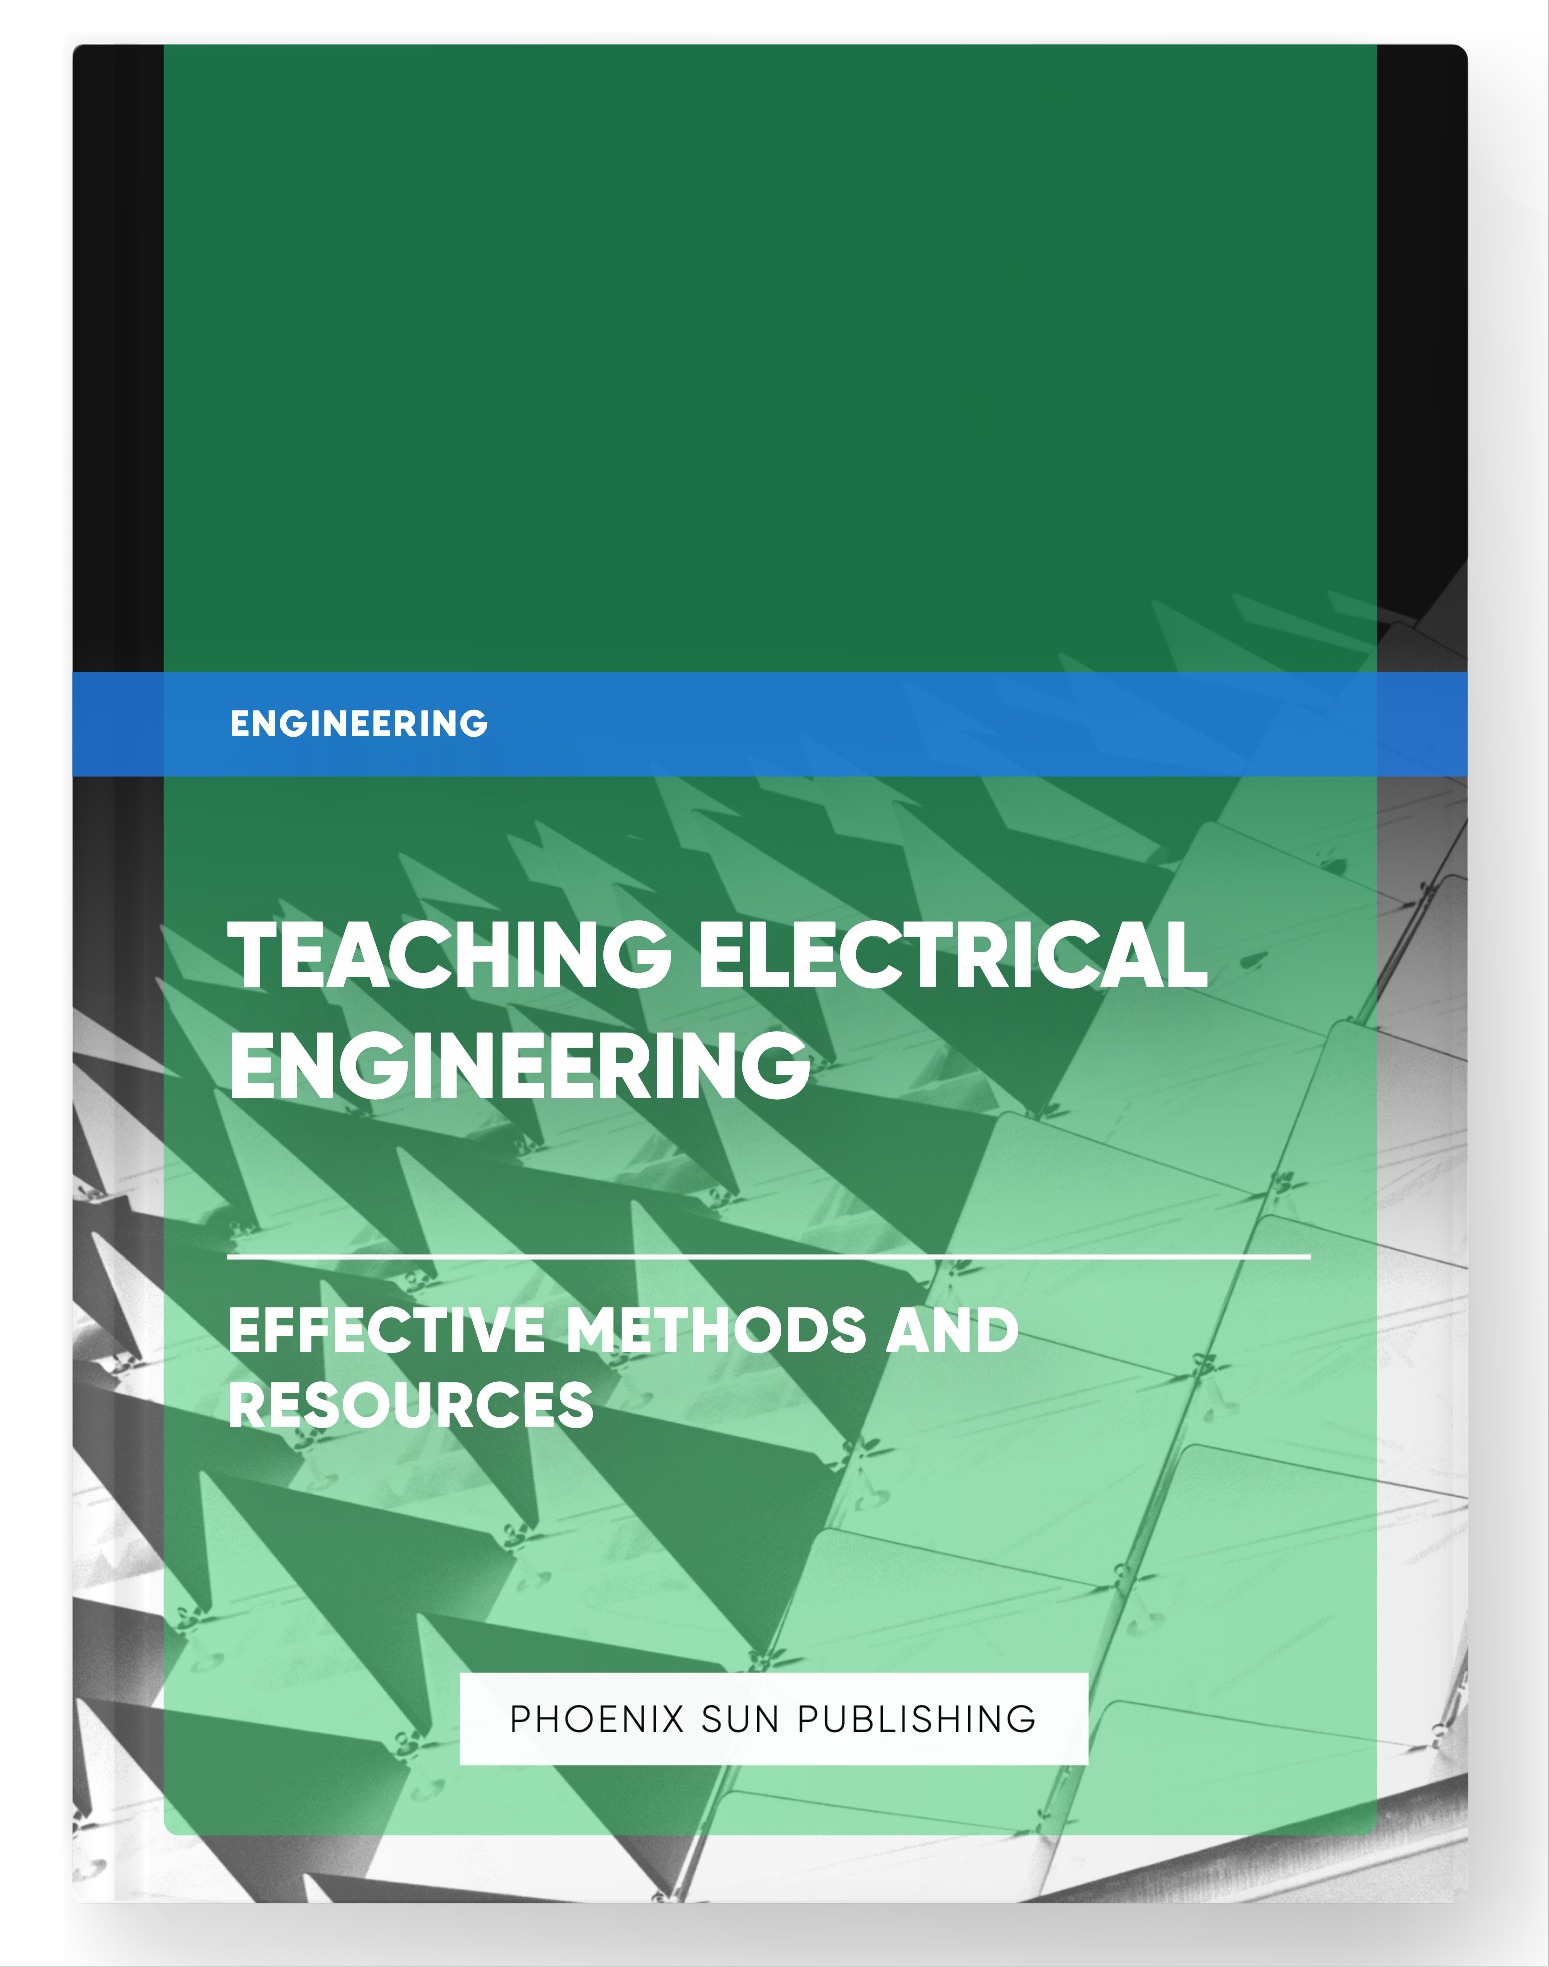 Teaching Electrical Engineering – Effective Methods and Resources